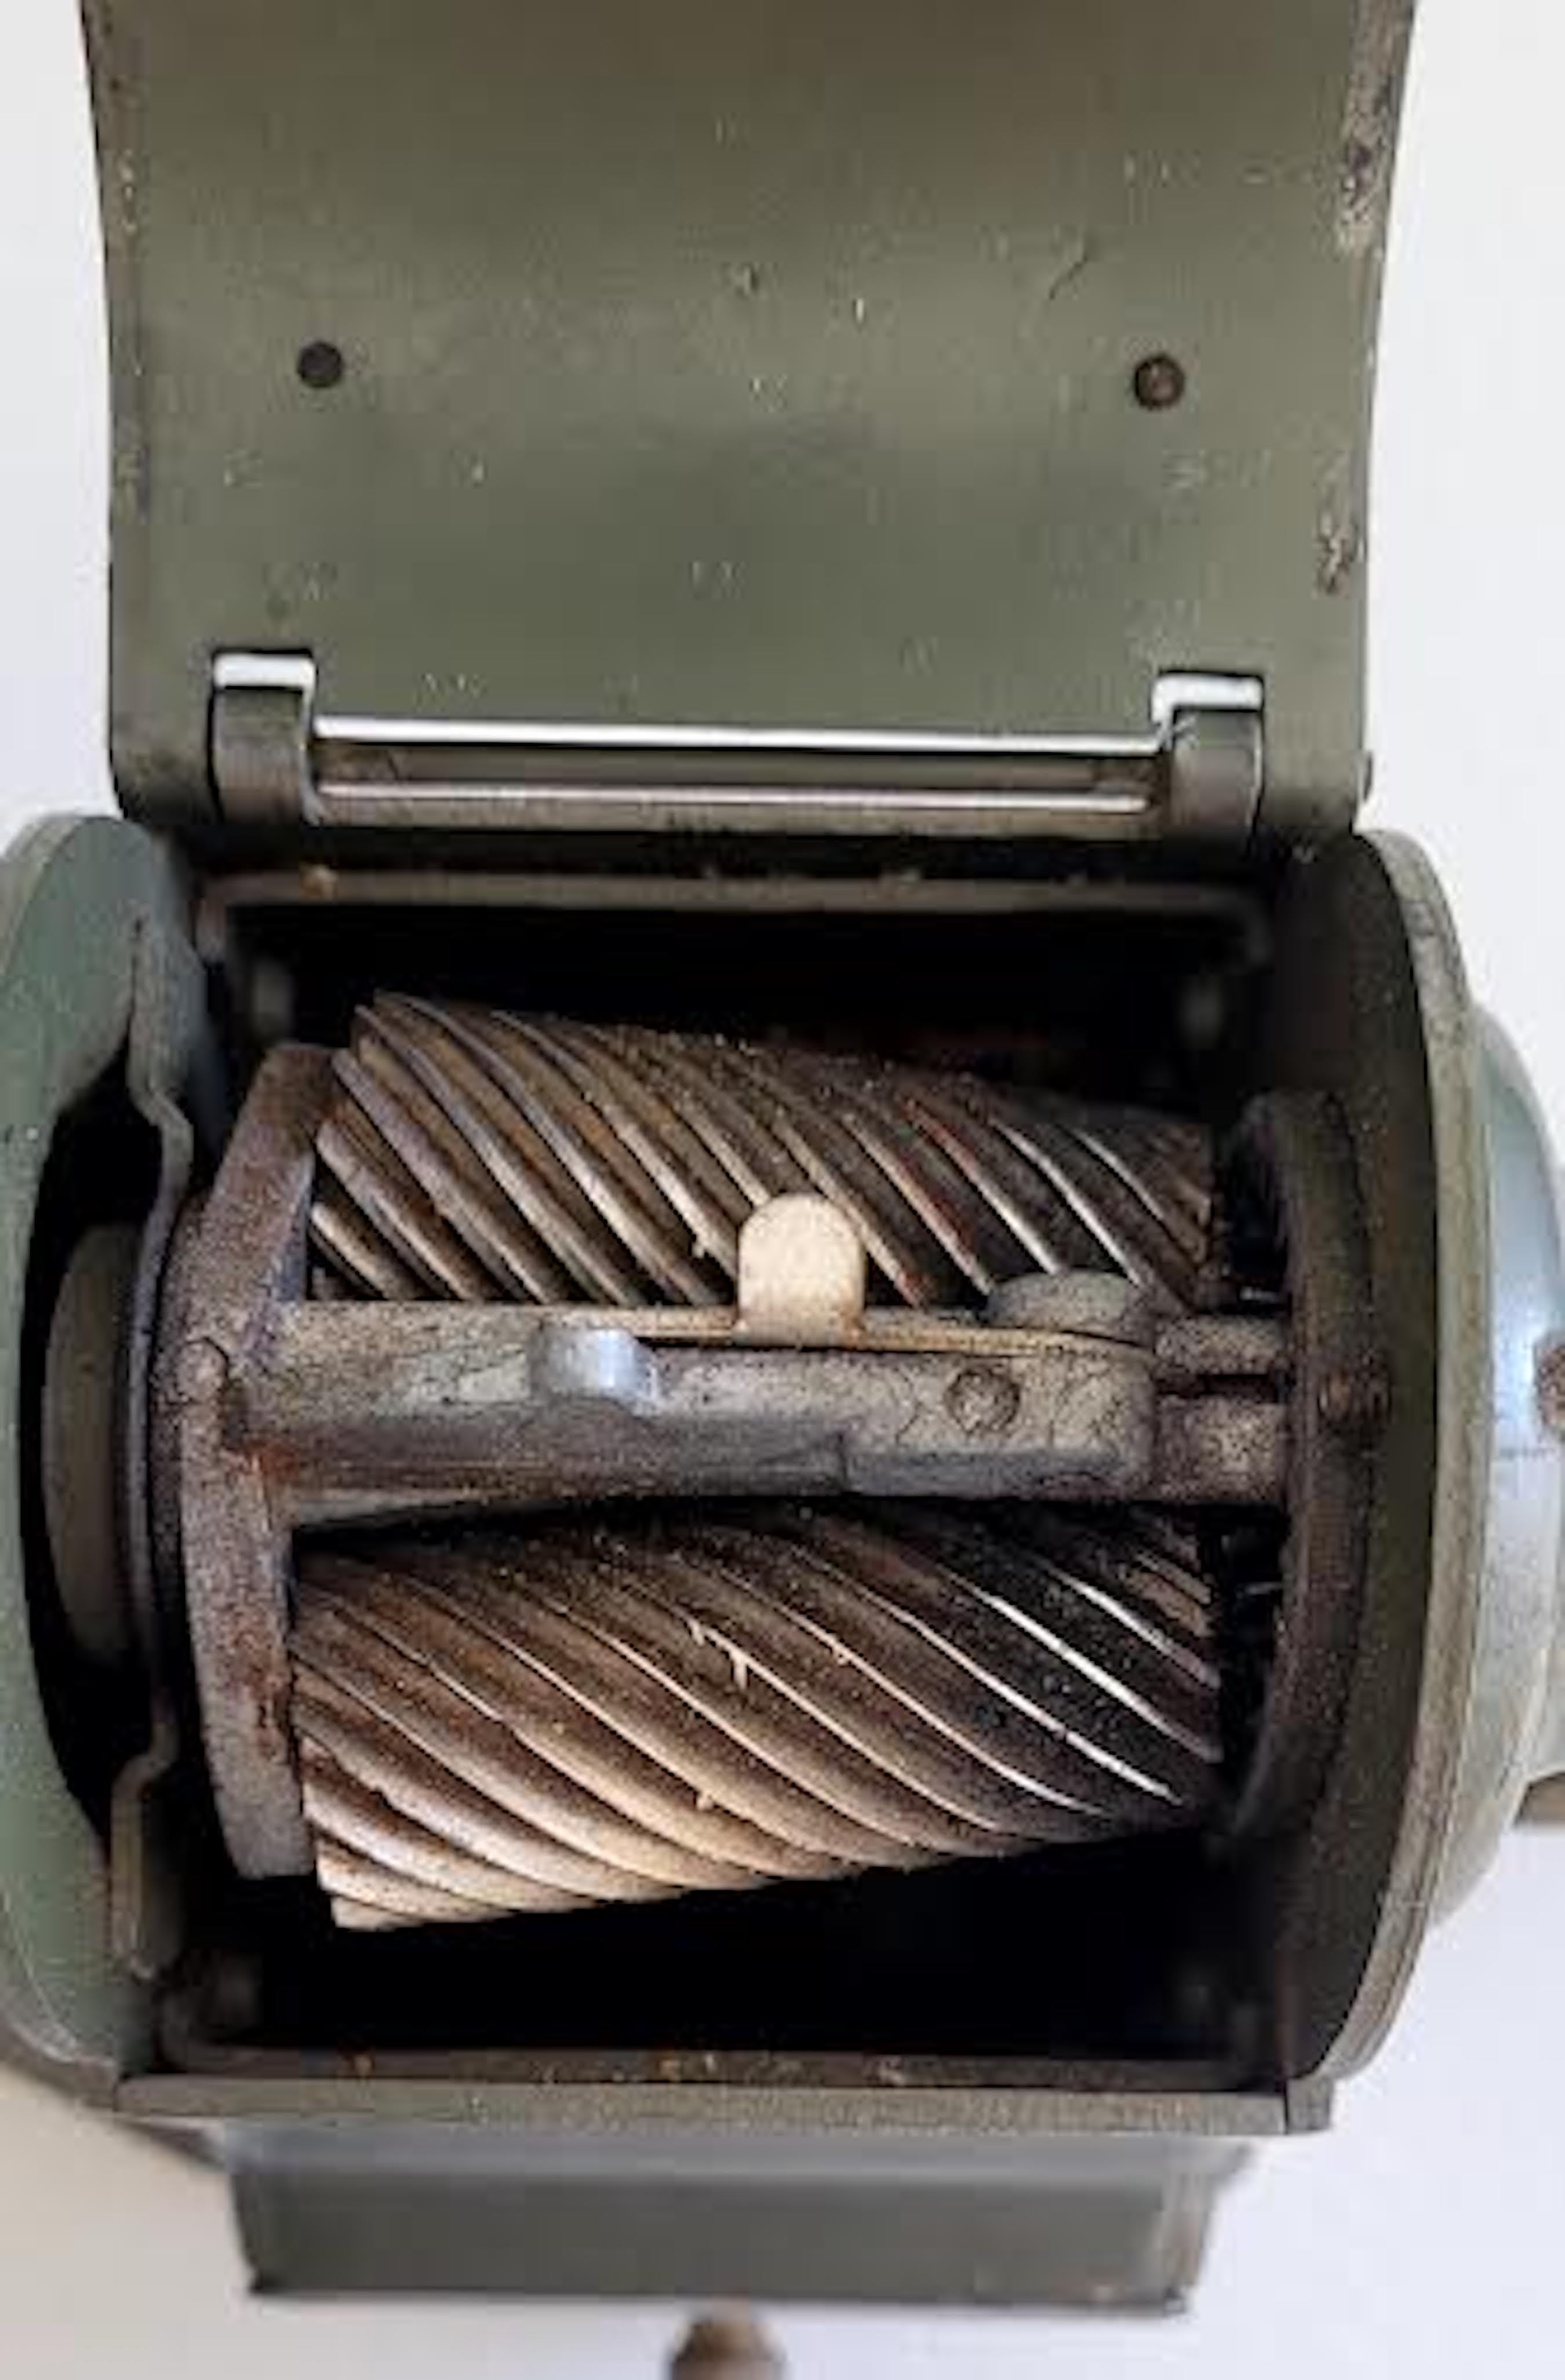 Climax No. 3 Industrial Automatic Pencil Sharpener 3